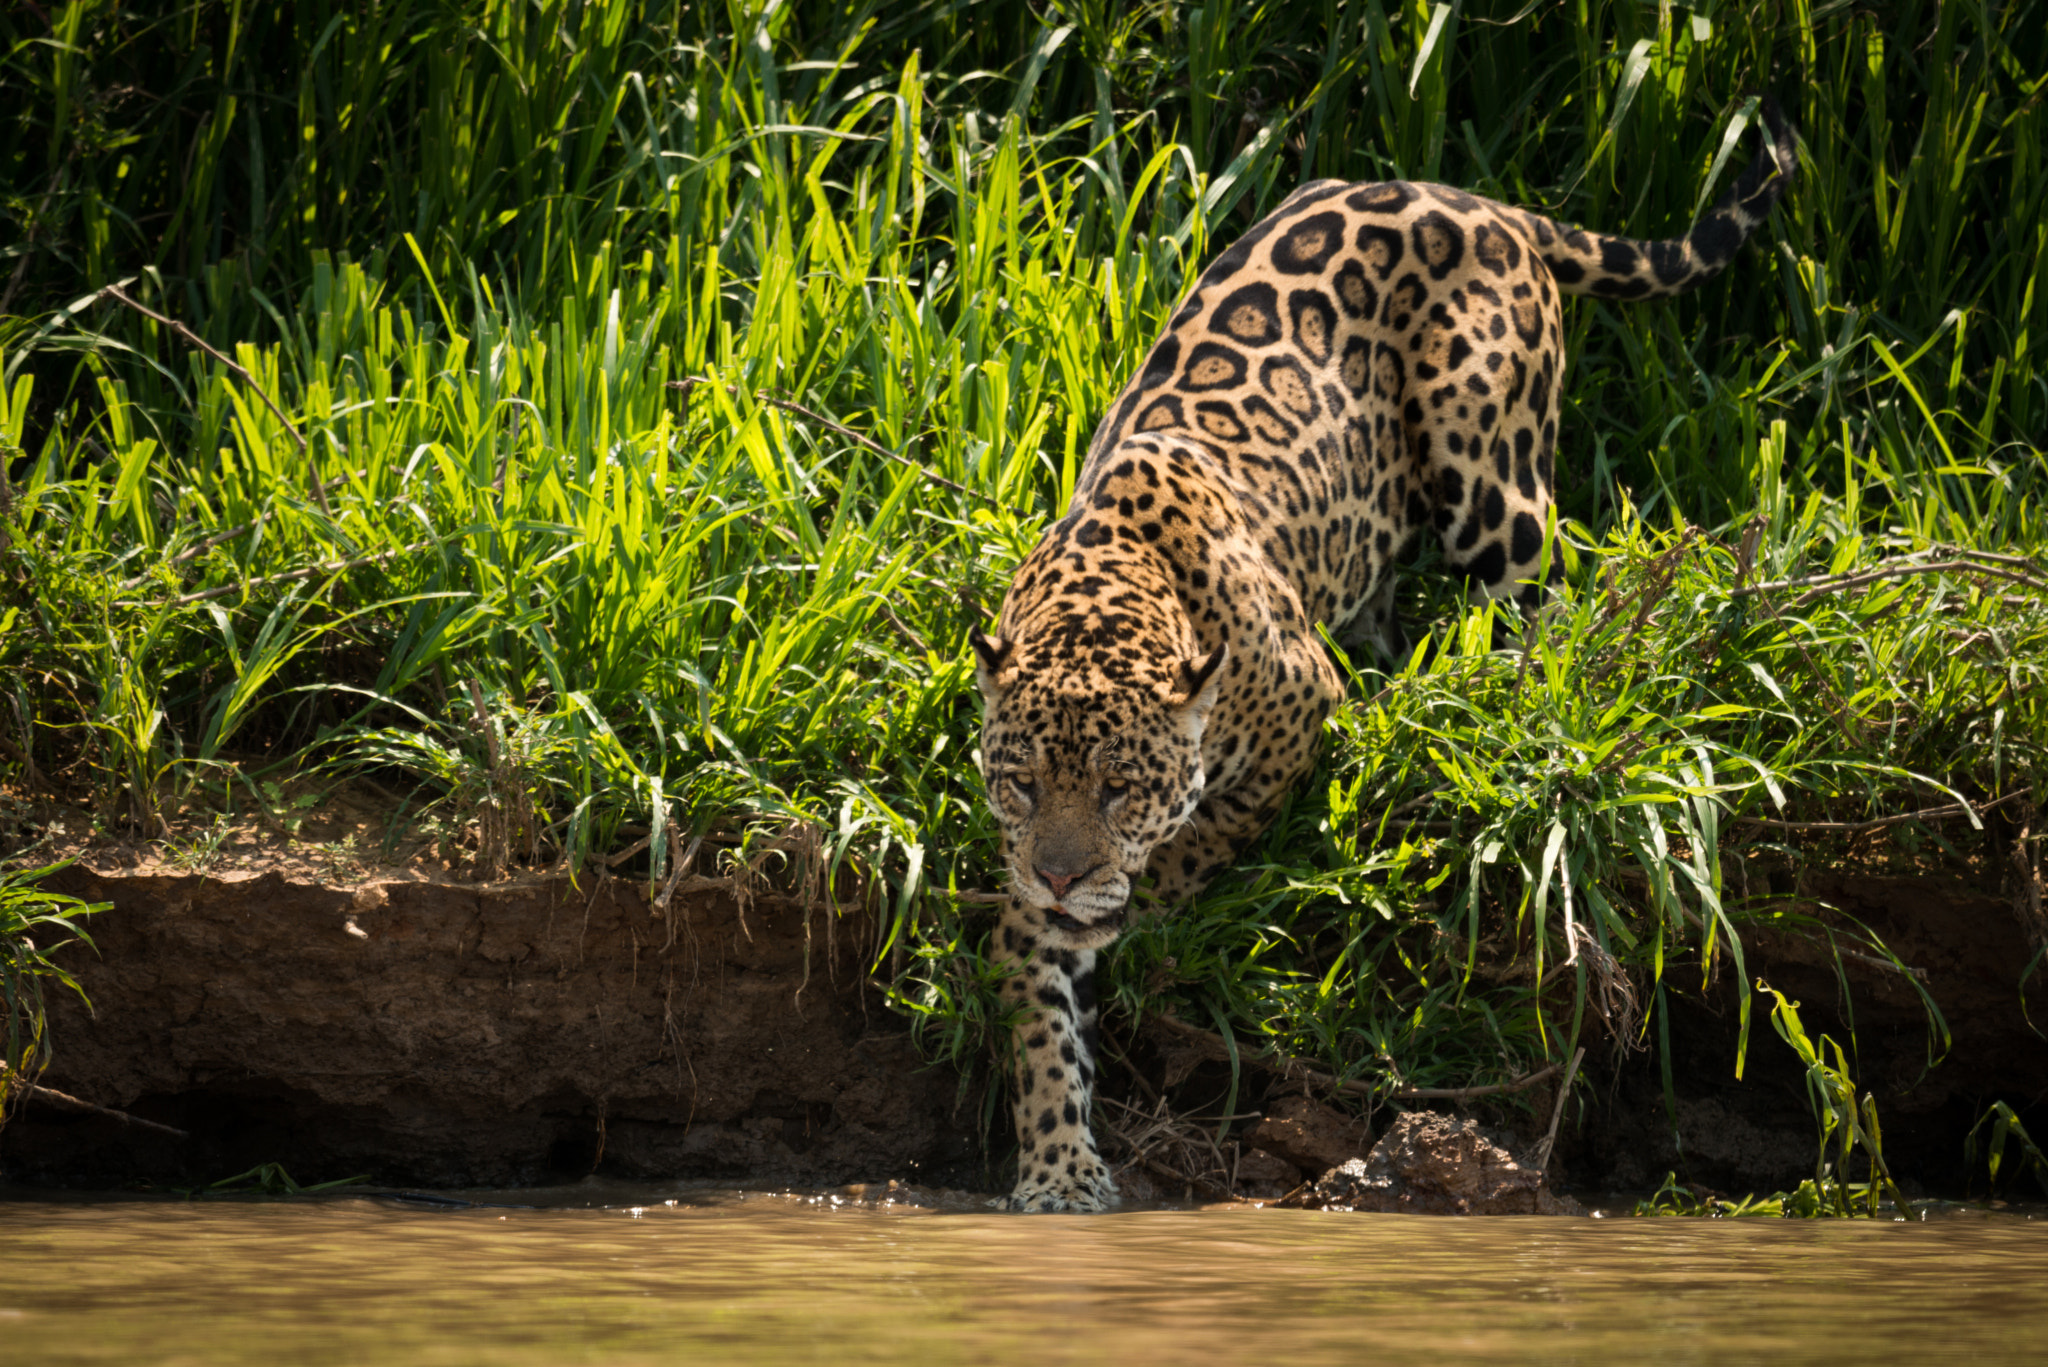 Nikon D800 sample photo. Jaguar stepping into river from grassy bank photography